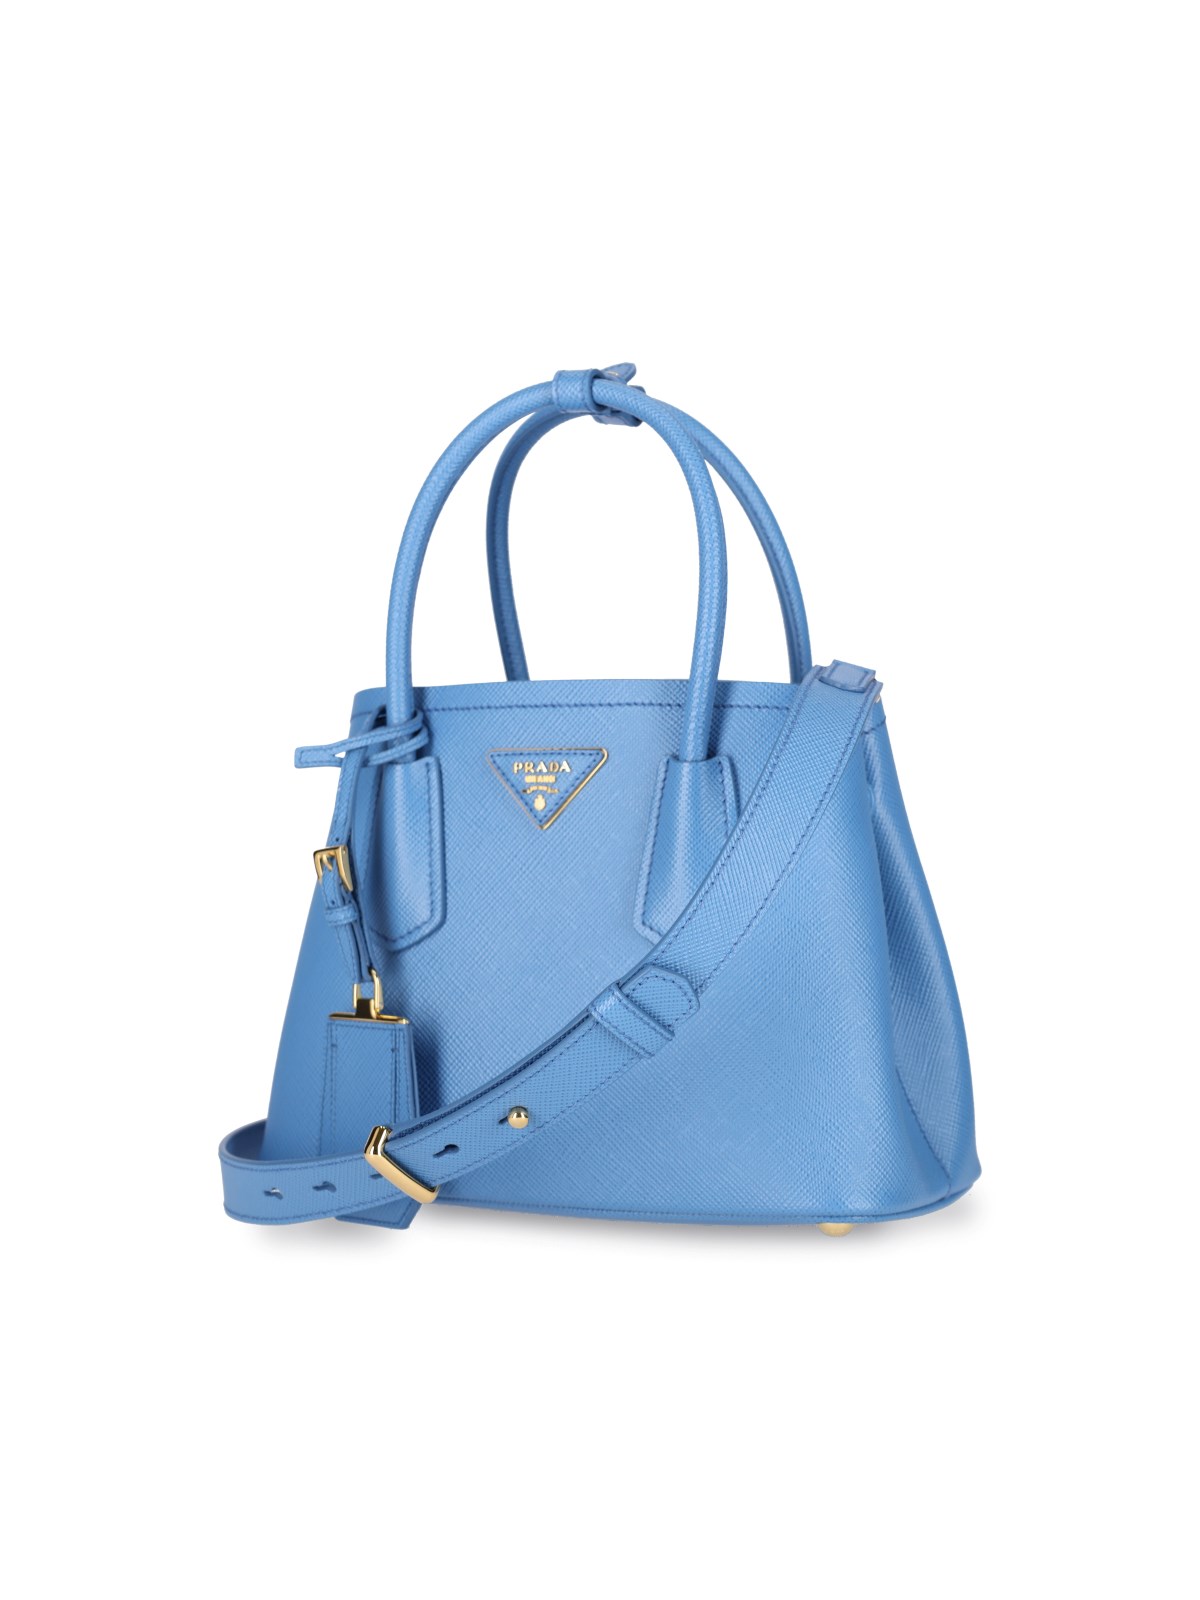 PRADA DOUBLE/CUIR BAG What fits 'Small to Mini' 